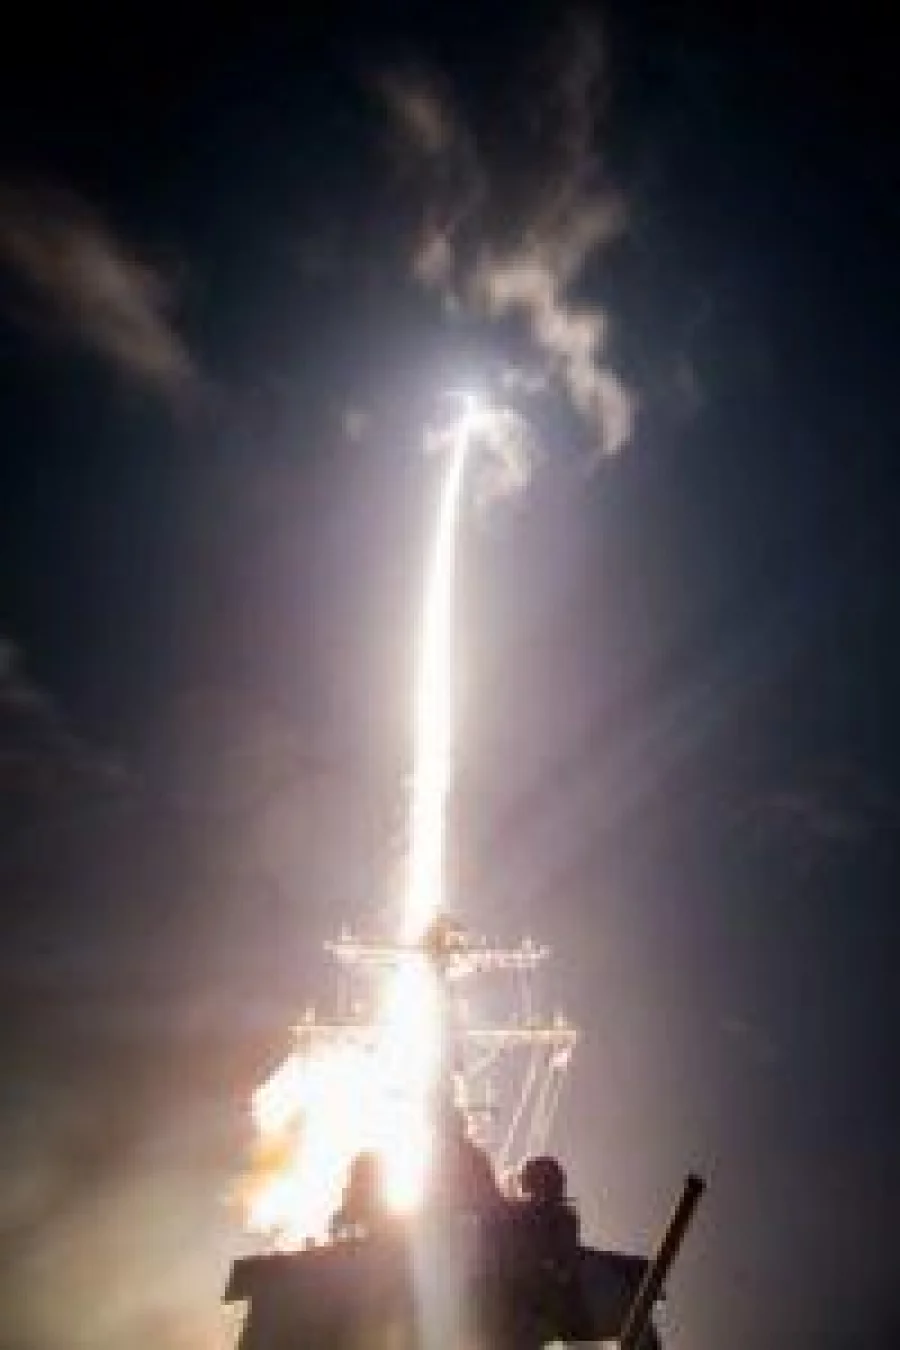 170203-D-EW716-0003PACIFIC OCEAN (Feb. 3, 2017) The US Missile Defense Agency (MDA), the Japan Ministry of Defense (MoD), and US Navy Sailors aboard the guided-missile destroyer USS John Paul Jones (DDG 53) successfully conducted a flight test February 3, 2017 (Hawaii Standard Time), resulting in the first intercept of a ballistic missile target using the Standard Missile-3 (SM-3) Block IIA off the west coast of Hawaii.  The United States and Japan have conducted the first interception of a ballistic missile target using a jointly built system, amid heightened tensions over North Korea's missile program. The two nations have been working together since 2006 to develop a variant of the Standard Missile-3, a ship-launched missile that operates as part of the Aegis Ballistic Missile Defense System. Friday's test off Kauai in Hawaii saw the Standard Missile-3 "Block IIA" successfully hit its target in space, the US Missile Defense Agency said.  / AFP PHOTO / US NAVY / Leah GARTON / RESTRICTED TO EDITORIAL USE - MANDATORY CREDIT "AFP PHOTO / US NAVY / LEAH GARTON" - NO MARKETING - NO ADVERTISING CAMPAIGNS - DISTRIBUTED AS A SERVICE TO CLIENTS